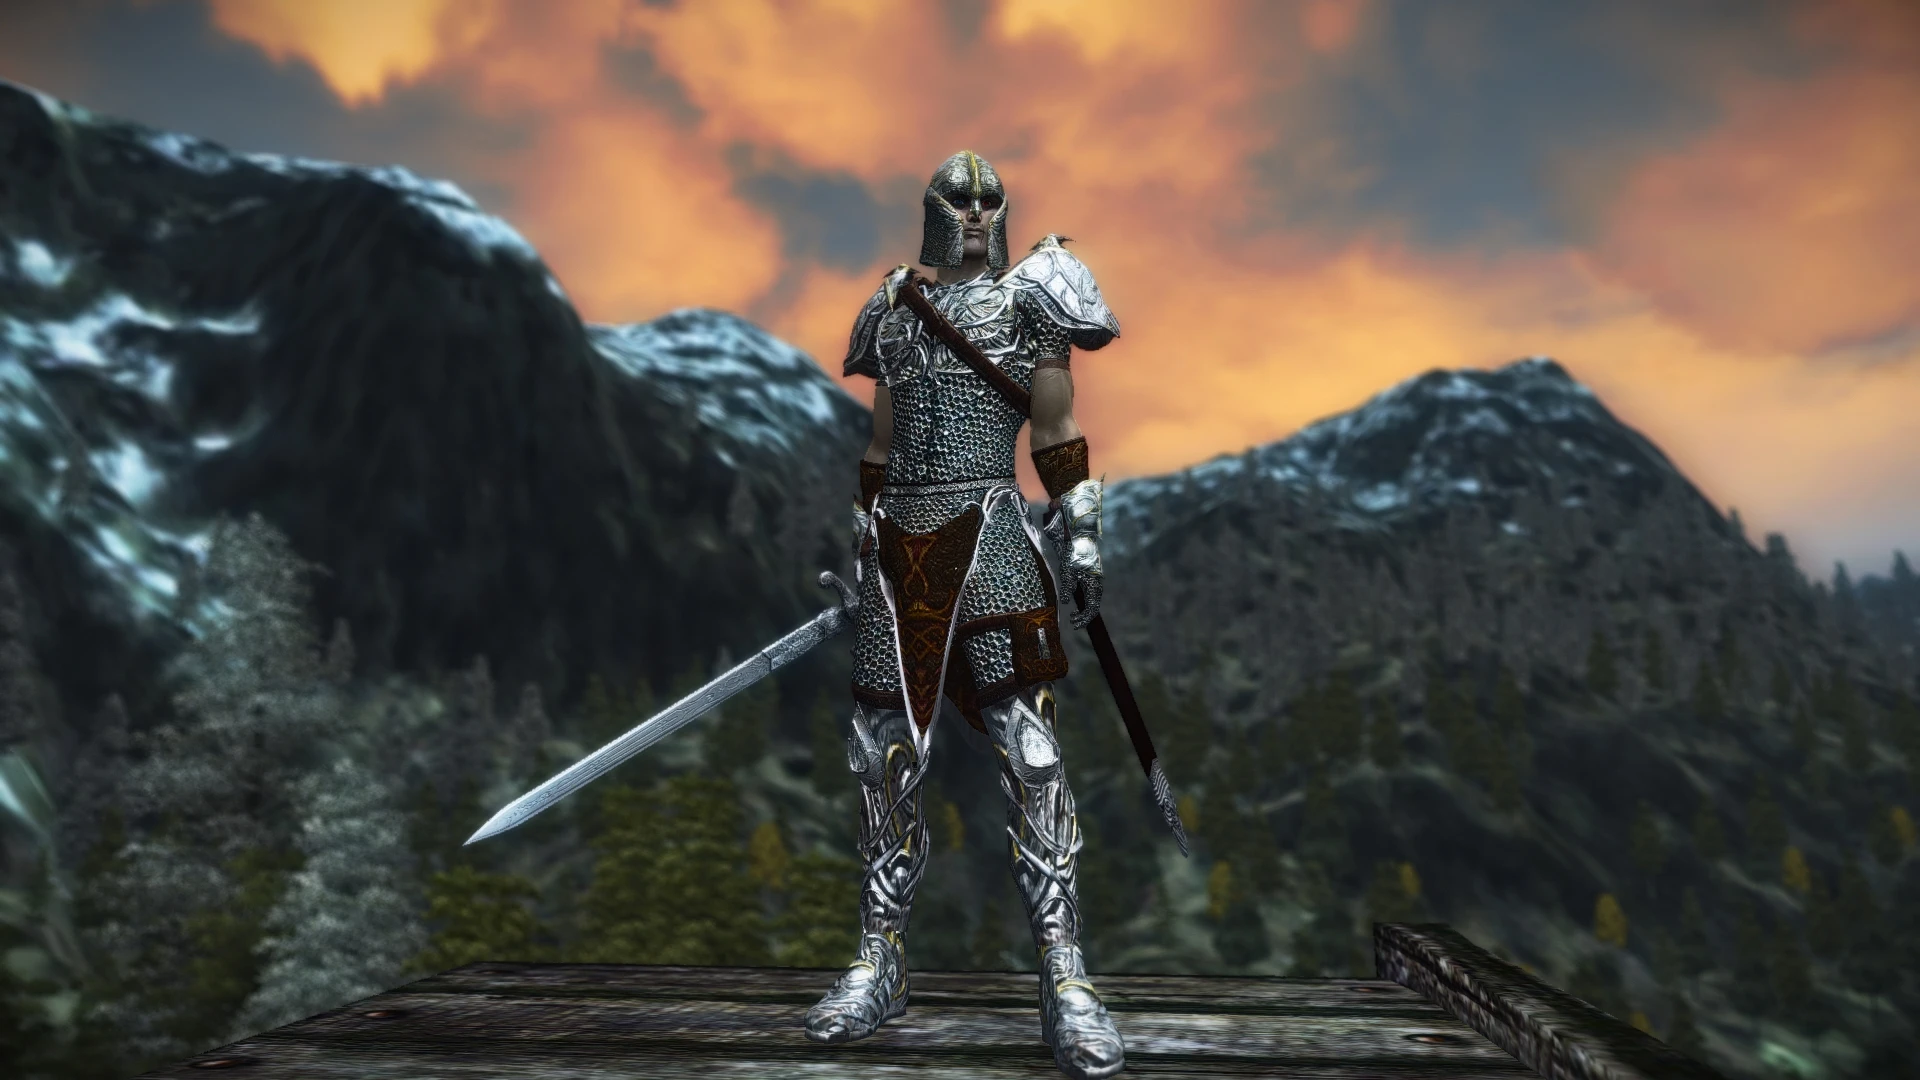 Gallery of Oblivion Mithril Armor.